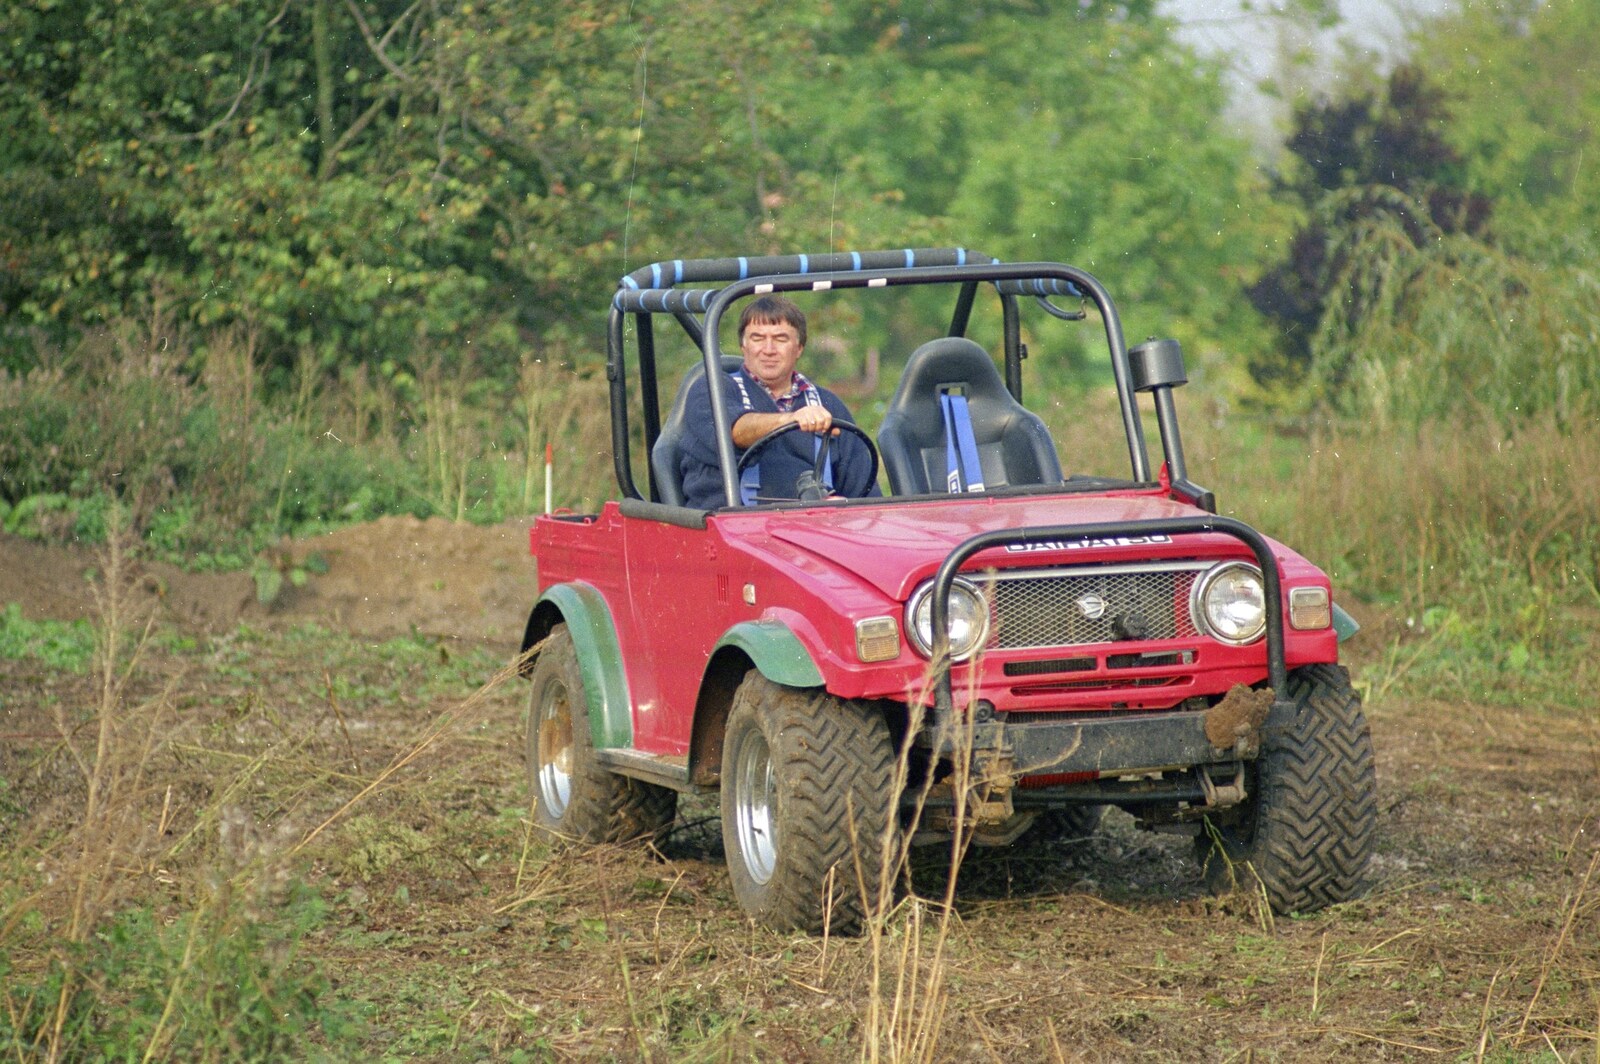 David Cork does a bit of off-road from Cider Making With Geoff and Brenda, Stuston, Suffolk - 10th September 1998